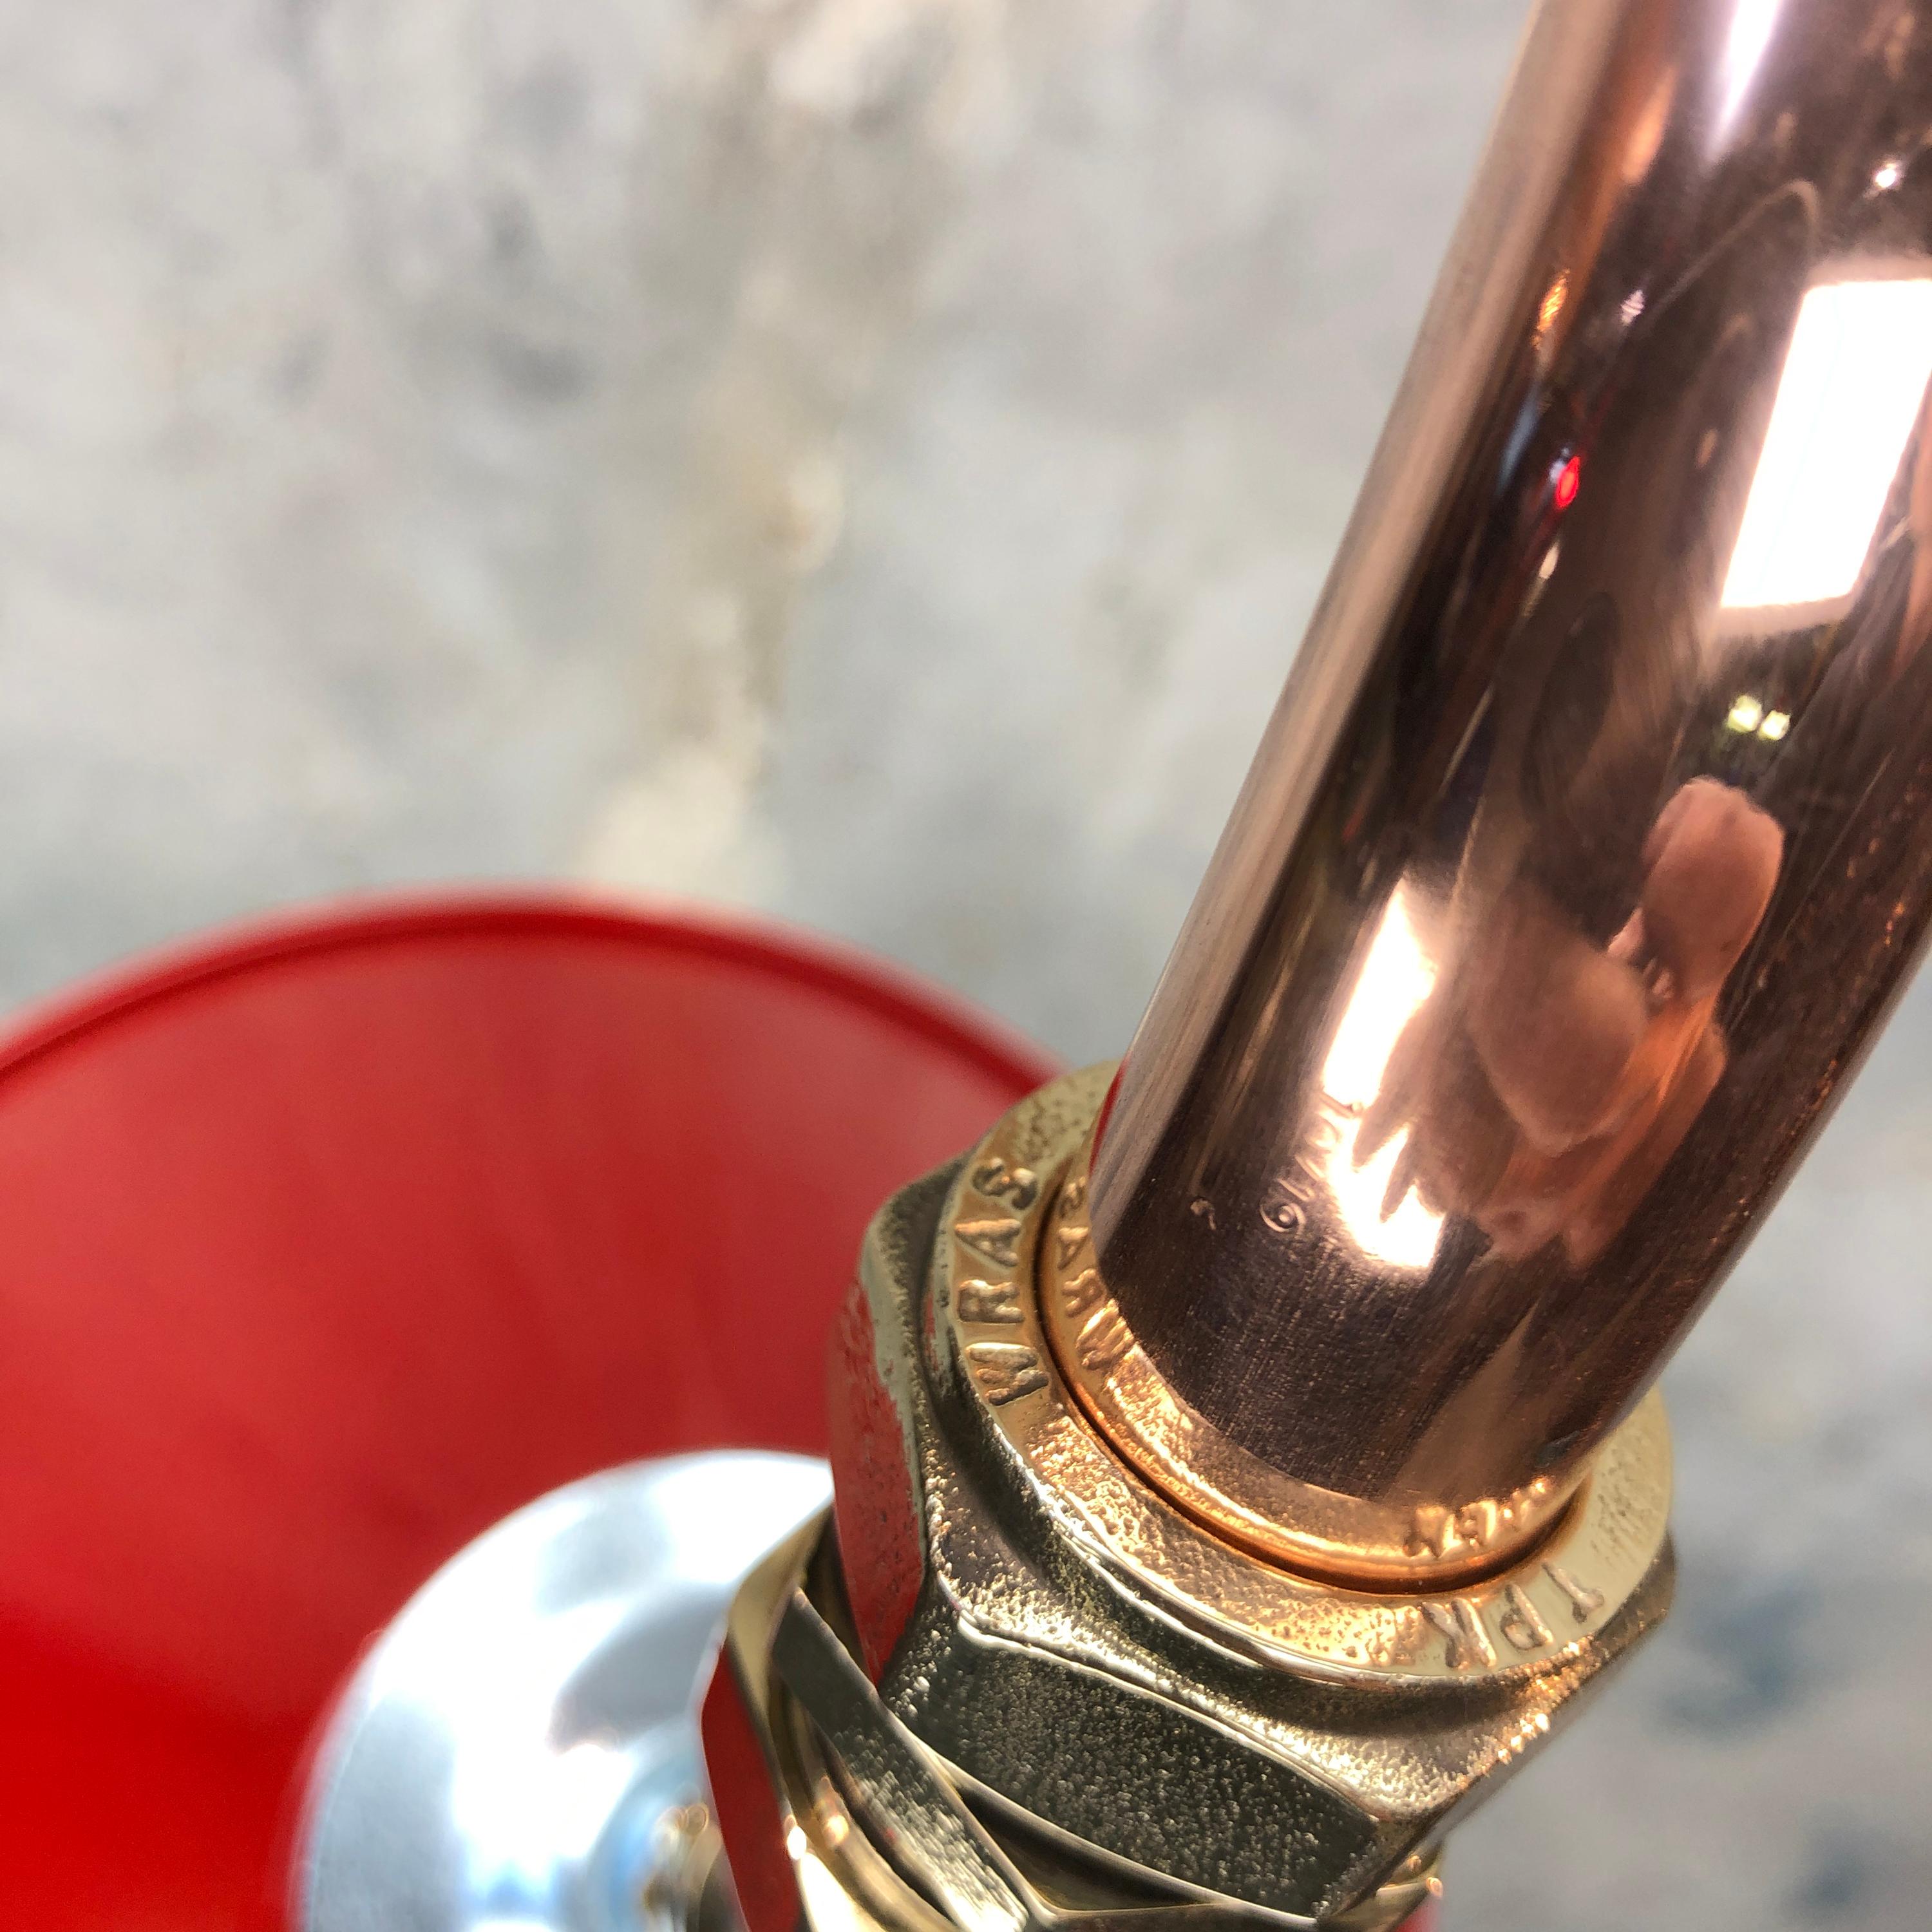 1980 British Army Lamp Shade in Red with Copper Cantilever Wall Lamp Edison Bulb For Sale 3